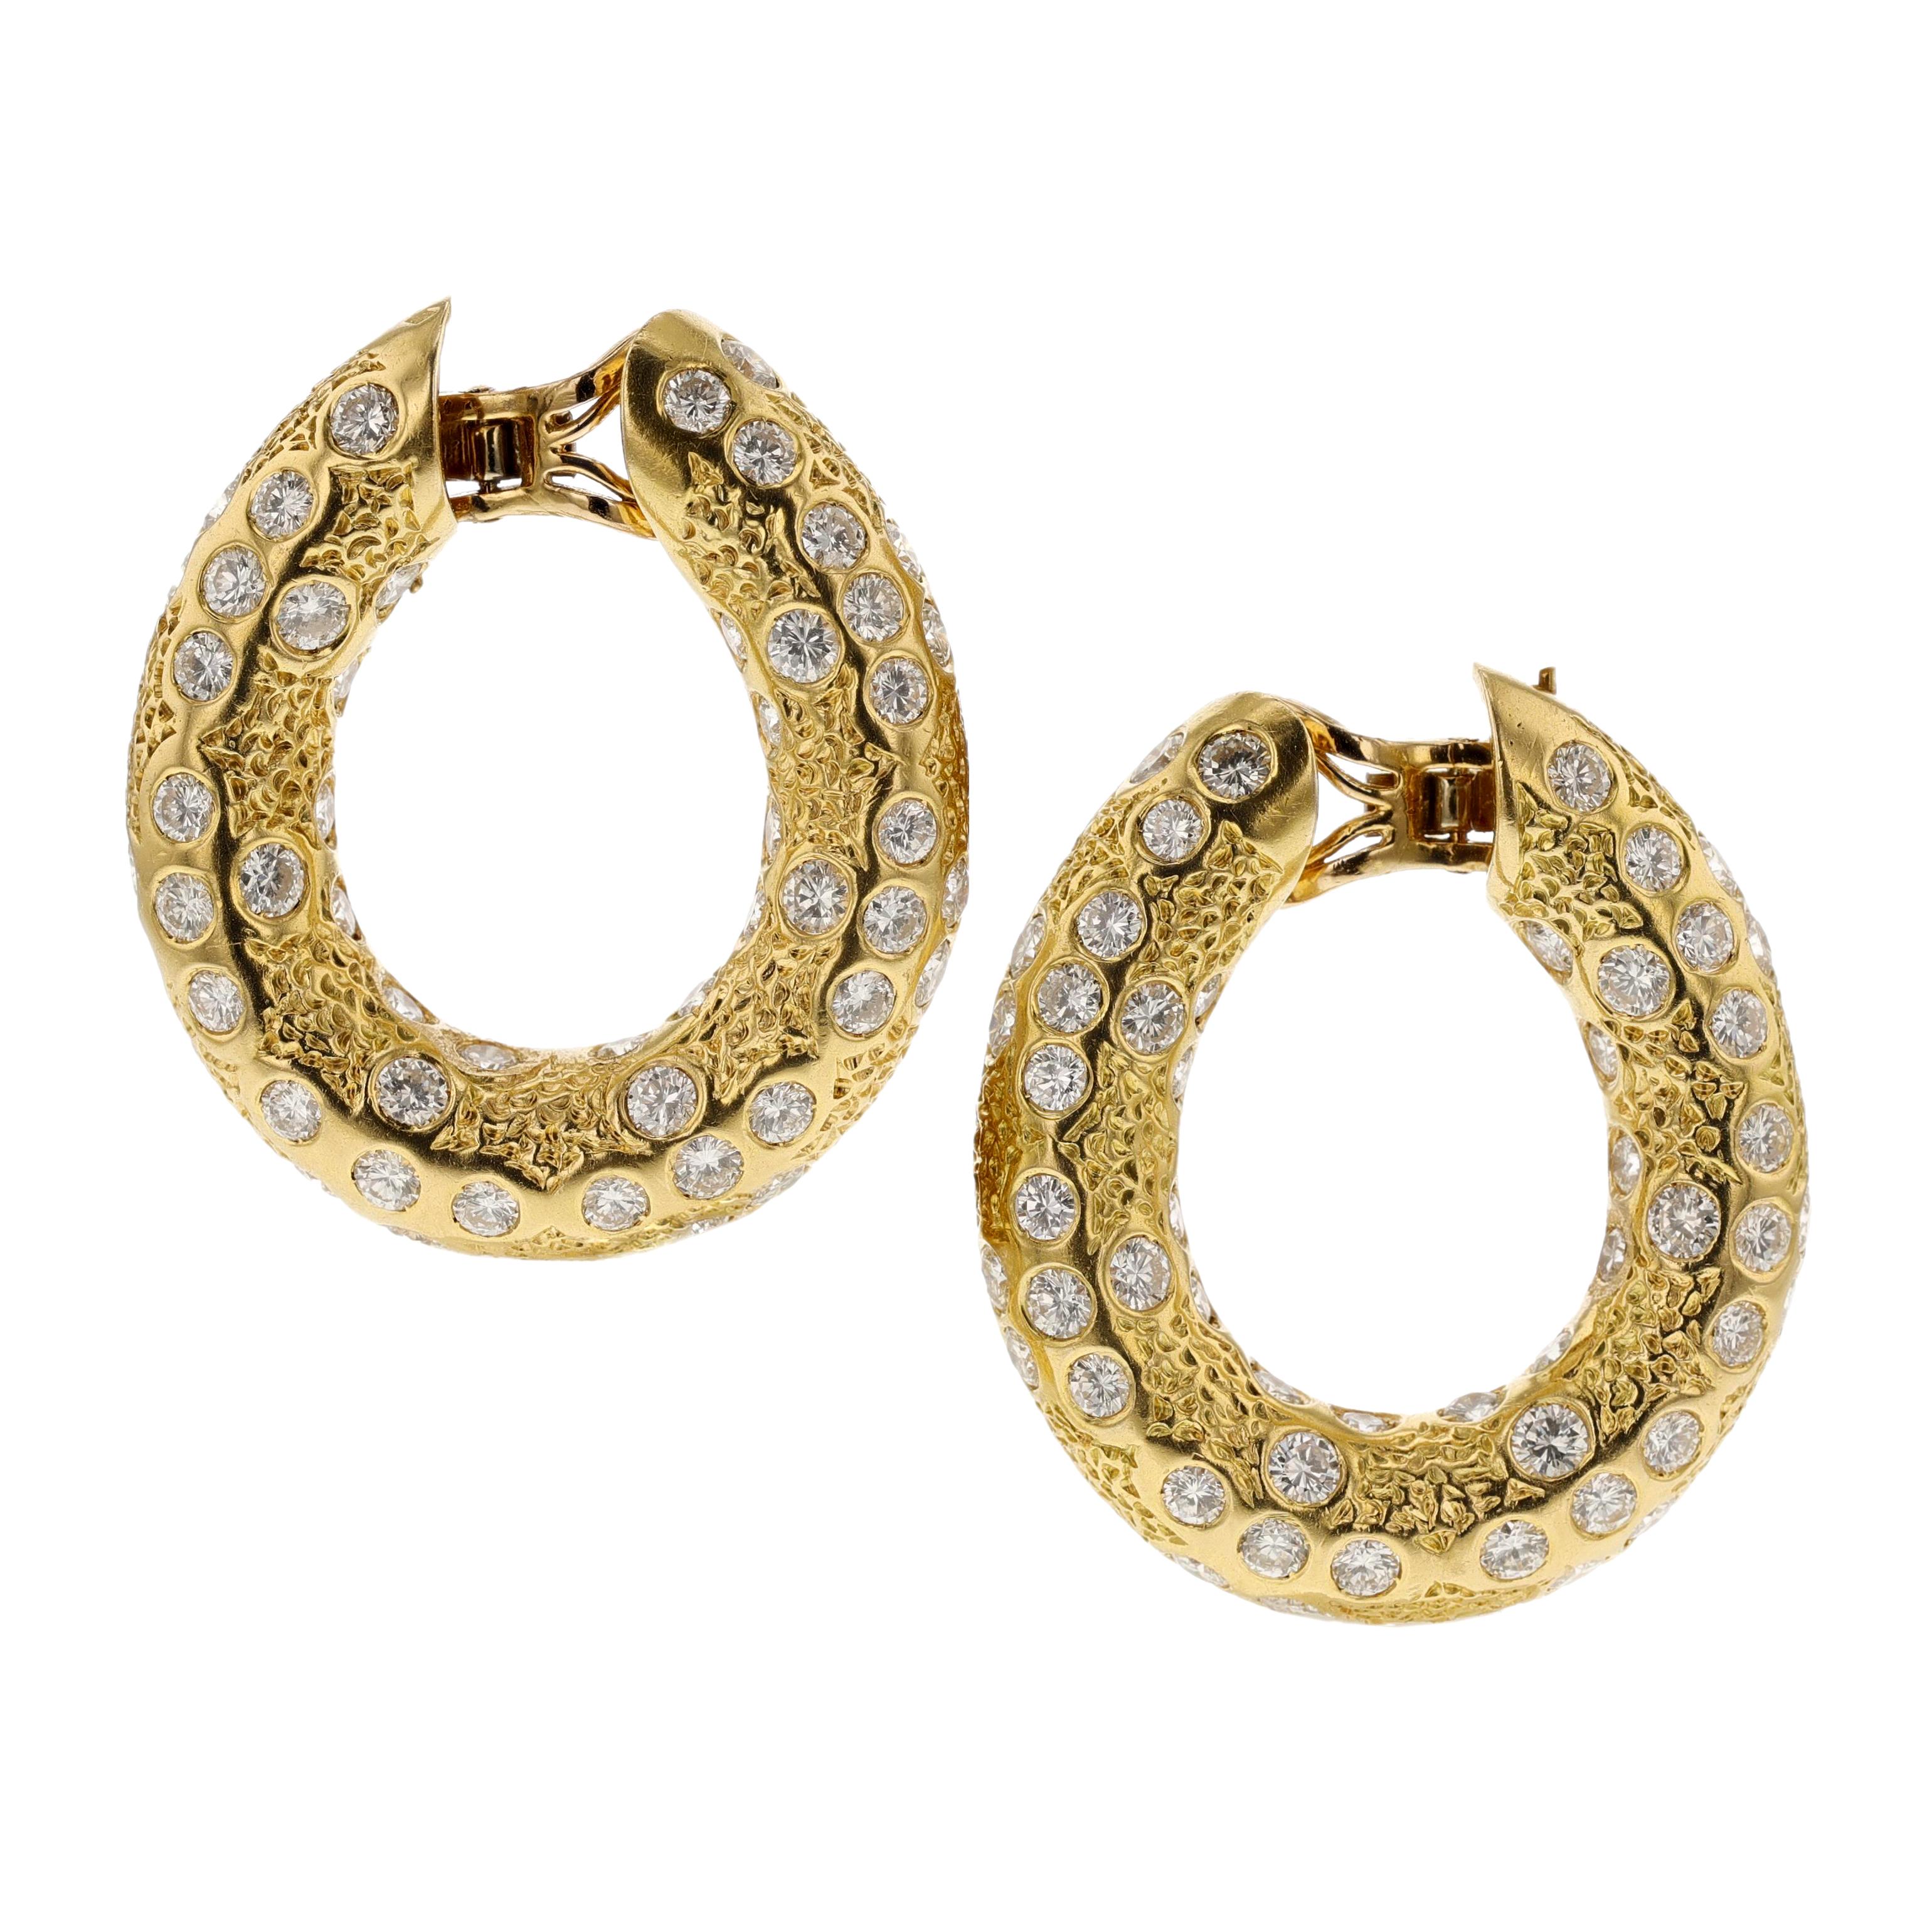 A pair of Van Cleef & Arpels (Péry et Fils) Diamond and Gold Hoop Earrings made in 18k yellow gold with French marks, circa 1970s. The diamonds weigh appx. 11-12 carats. The dimensions are 3.7 x 3.2 cm and weigh 29.67 grams. They are clip-ons and